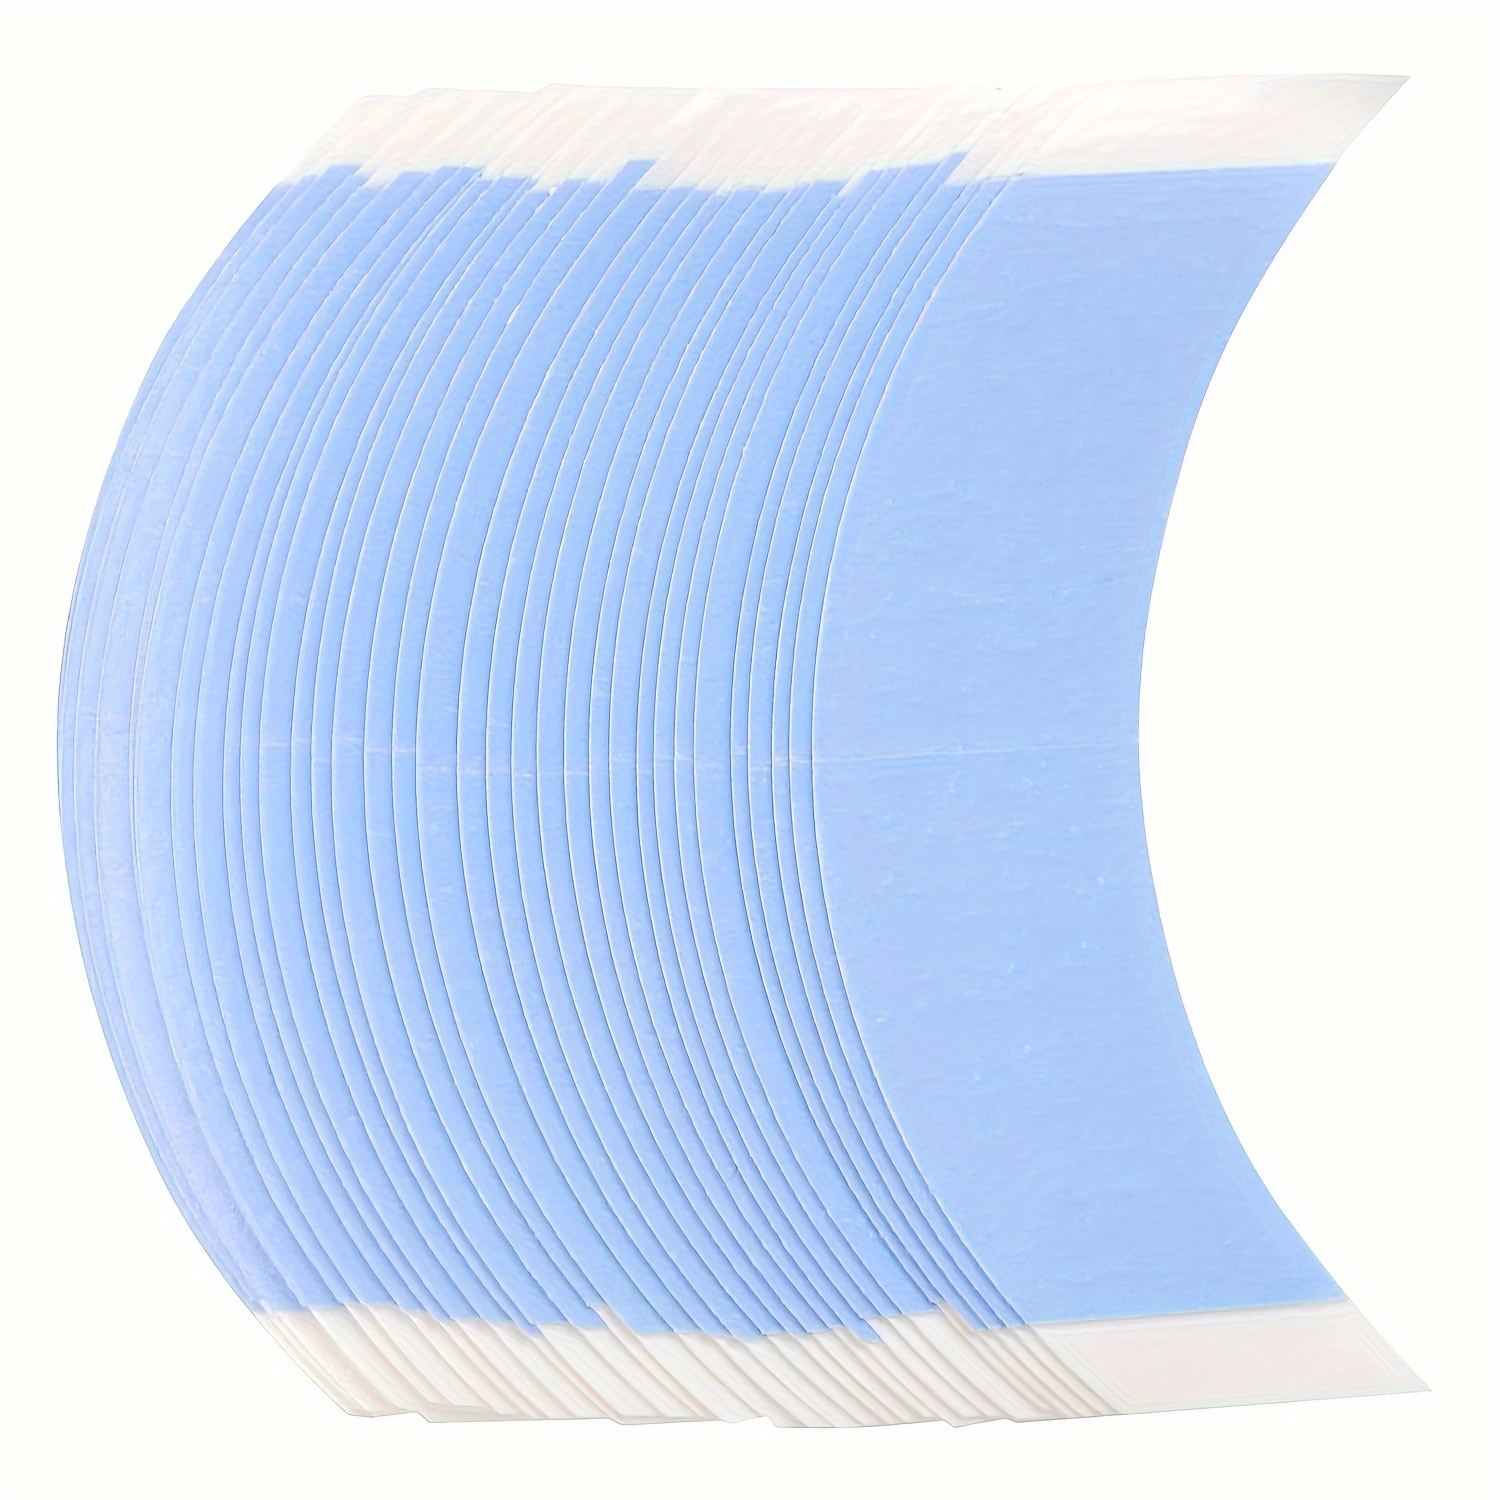 

36 Pieces Tapes Lace Front Wig Tape Lace Clear Toupee Tape Adhesive Tape Double-sided Waterproof Lace Wigs Tape C Lace Tape For Wigs Toupees Hair Pieces And Hair Extension